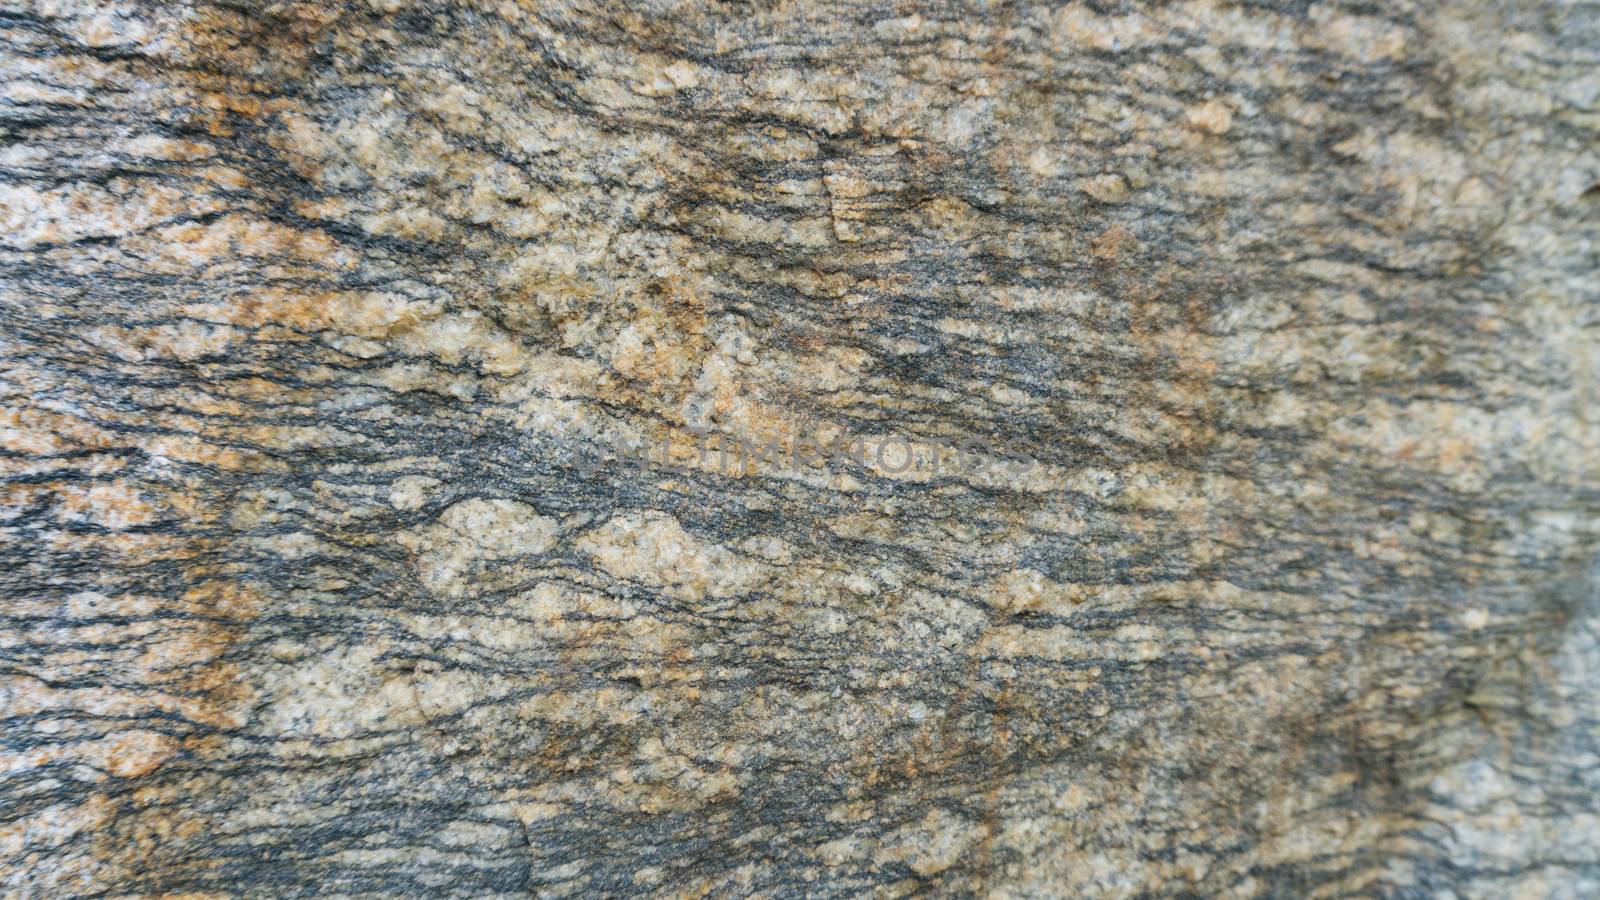 Gneiss Layered Texture. The layers and texture of this natural, Granite Gneiss make an edgy, yet earthy background for any project.